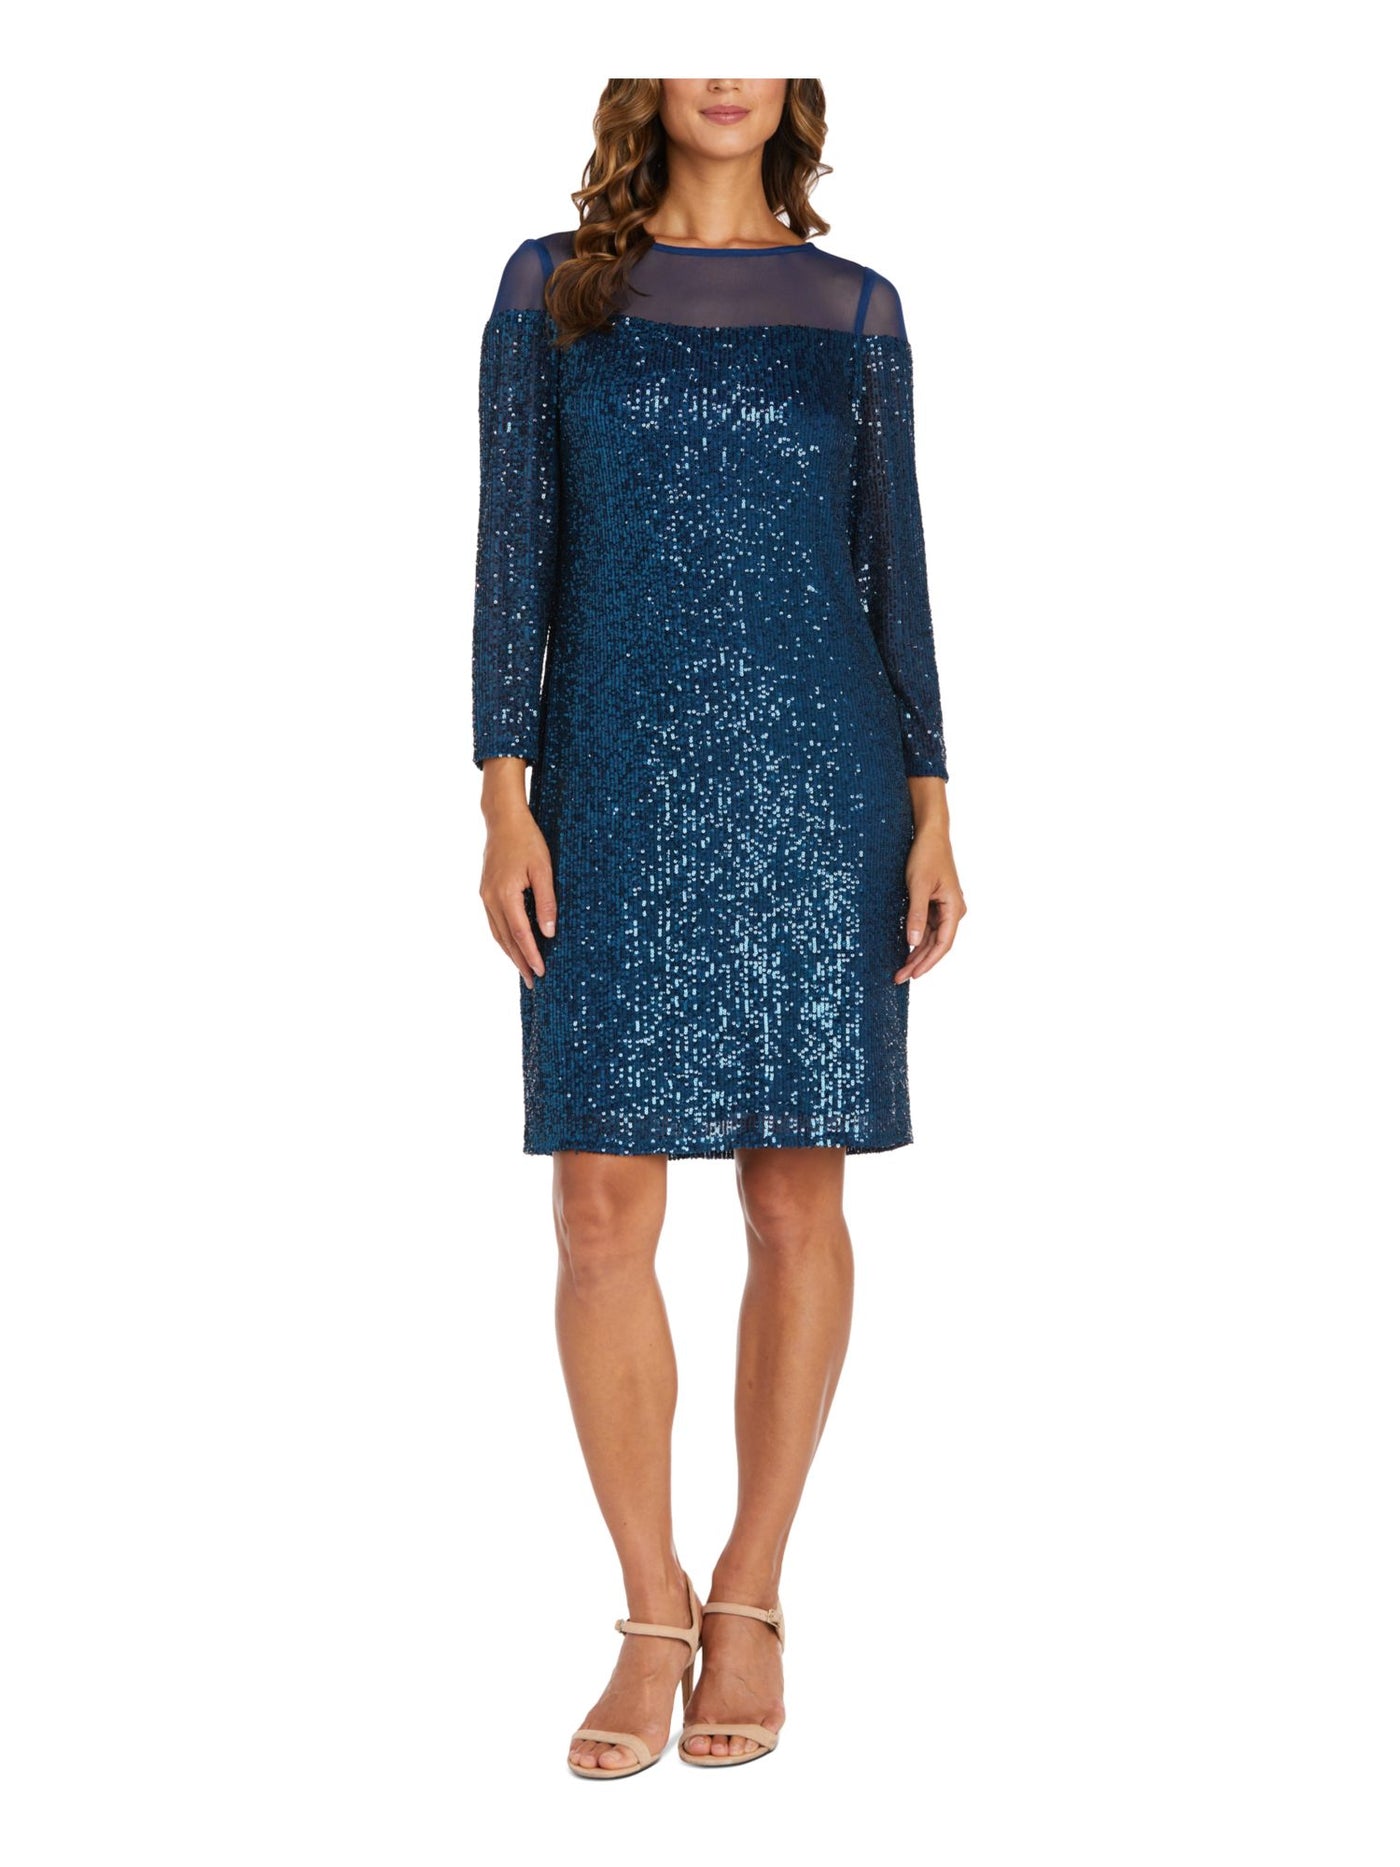 R&M RICHARDS Womens Navy Stretch Sequined Keyhole Back Lined Long Sleeve Illusion Neckline Above The Knee Party Sheath Dress Petites 8P